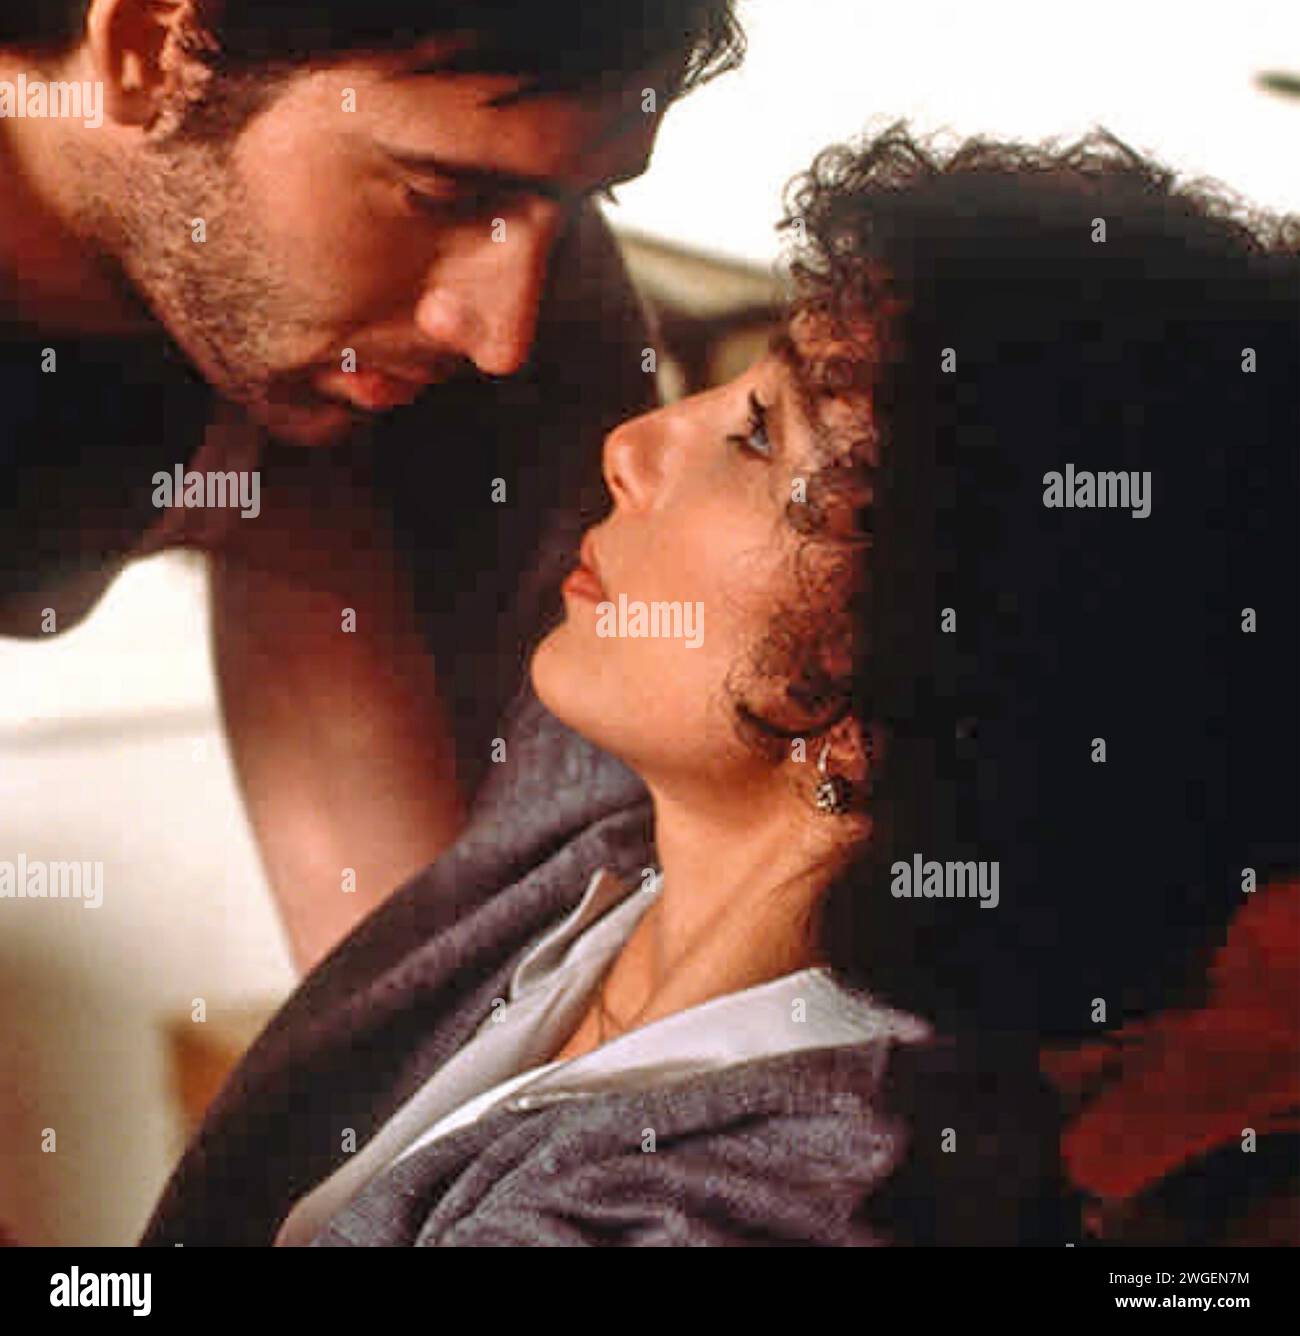 MOONSTRUCK 1997 mgm/ua film with Nicolas Cage and Cher Stock Photo